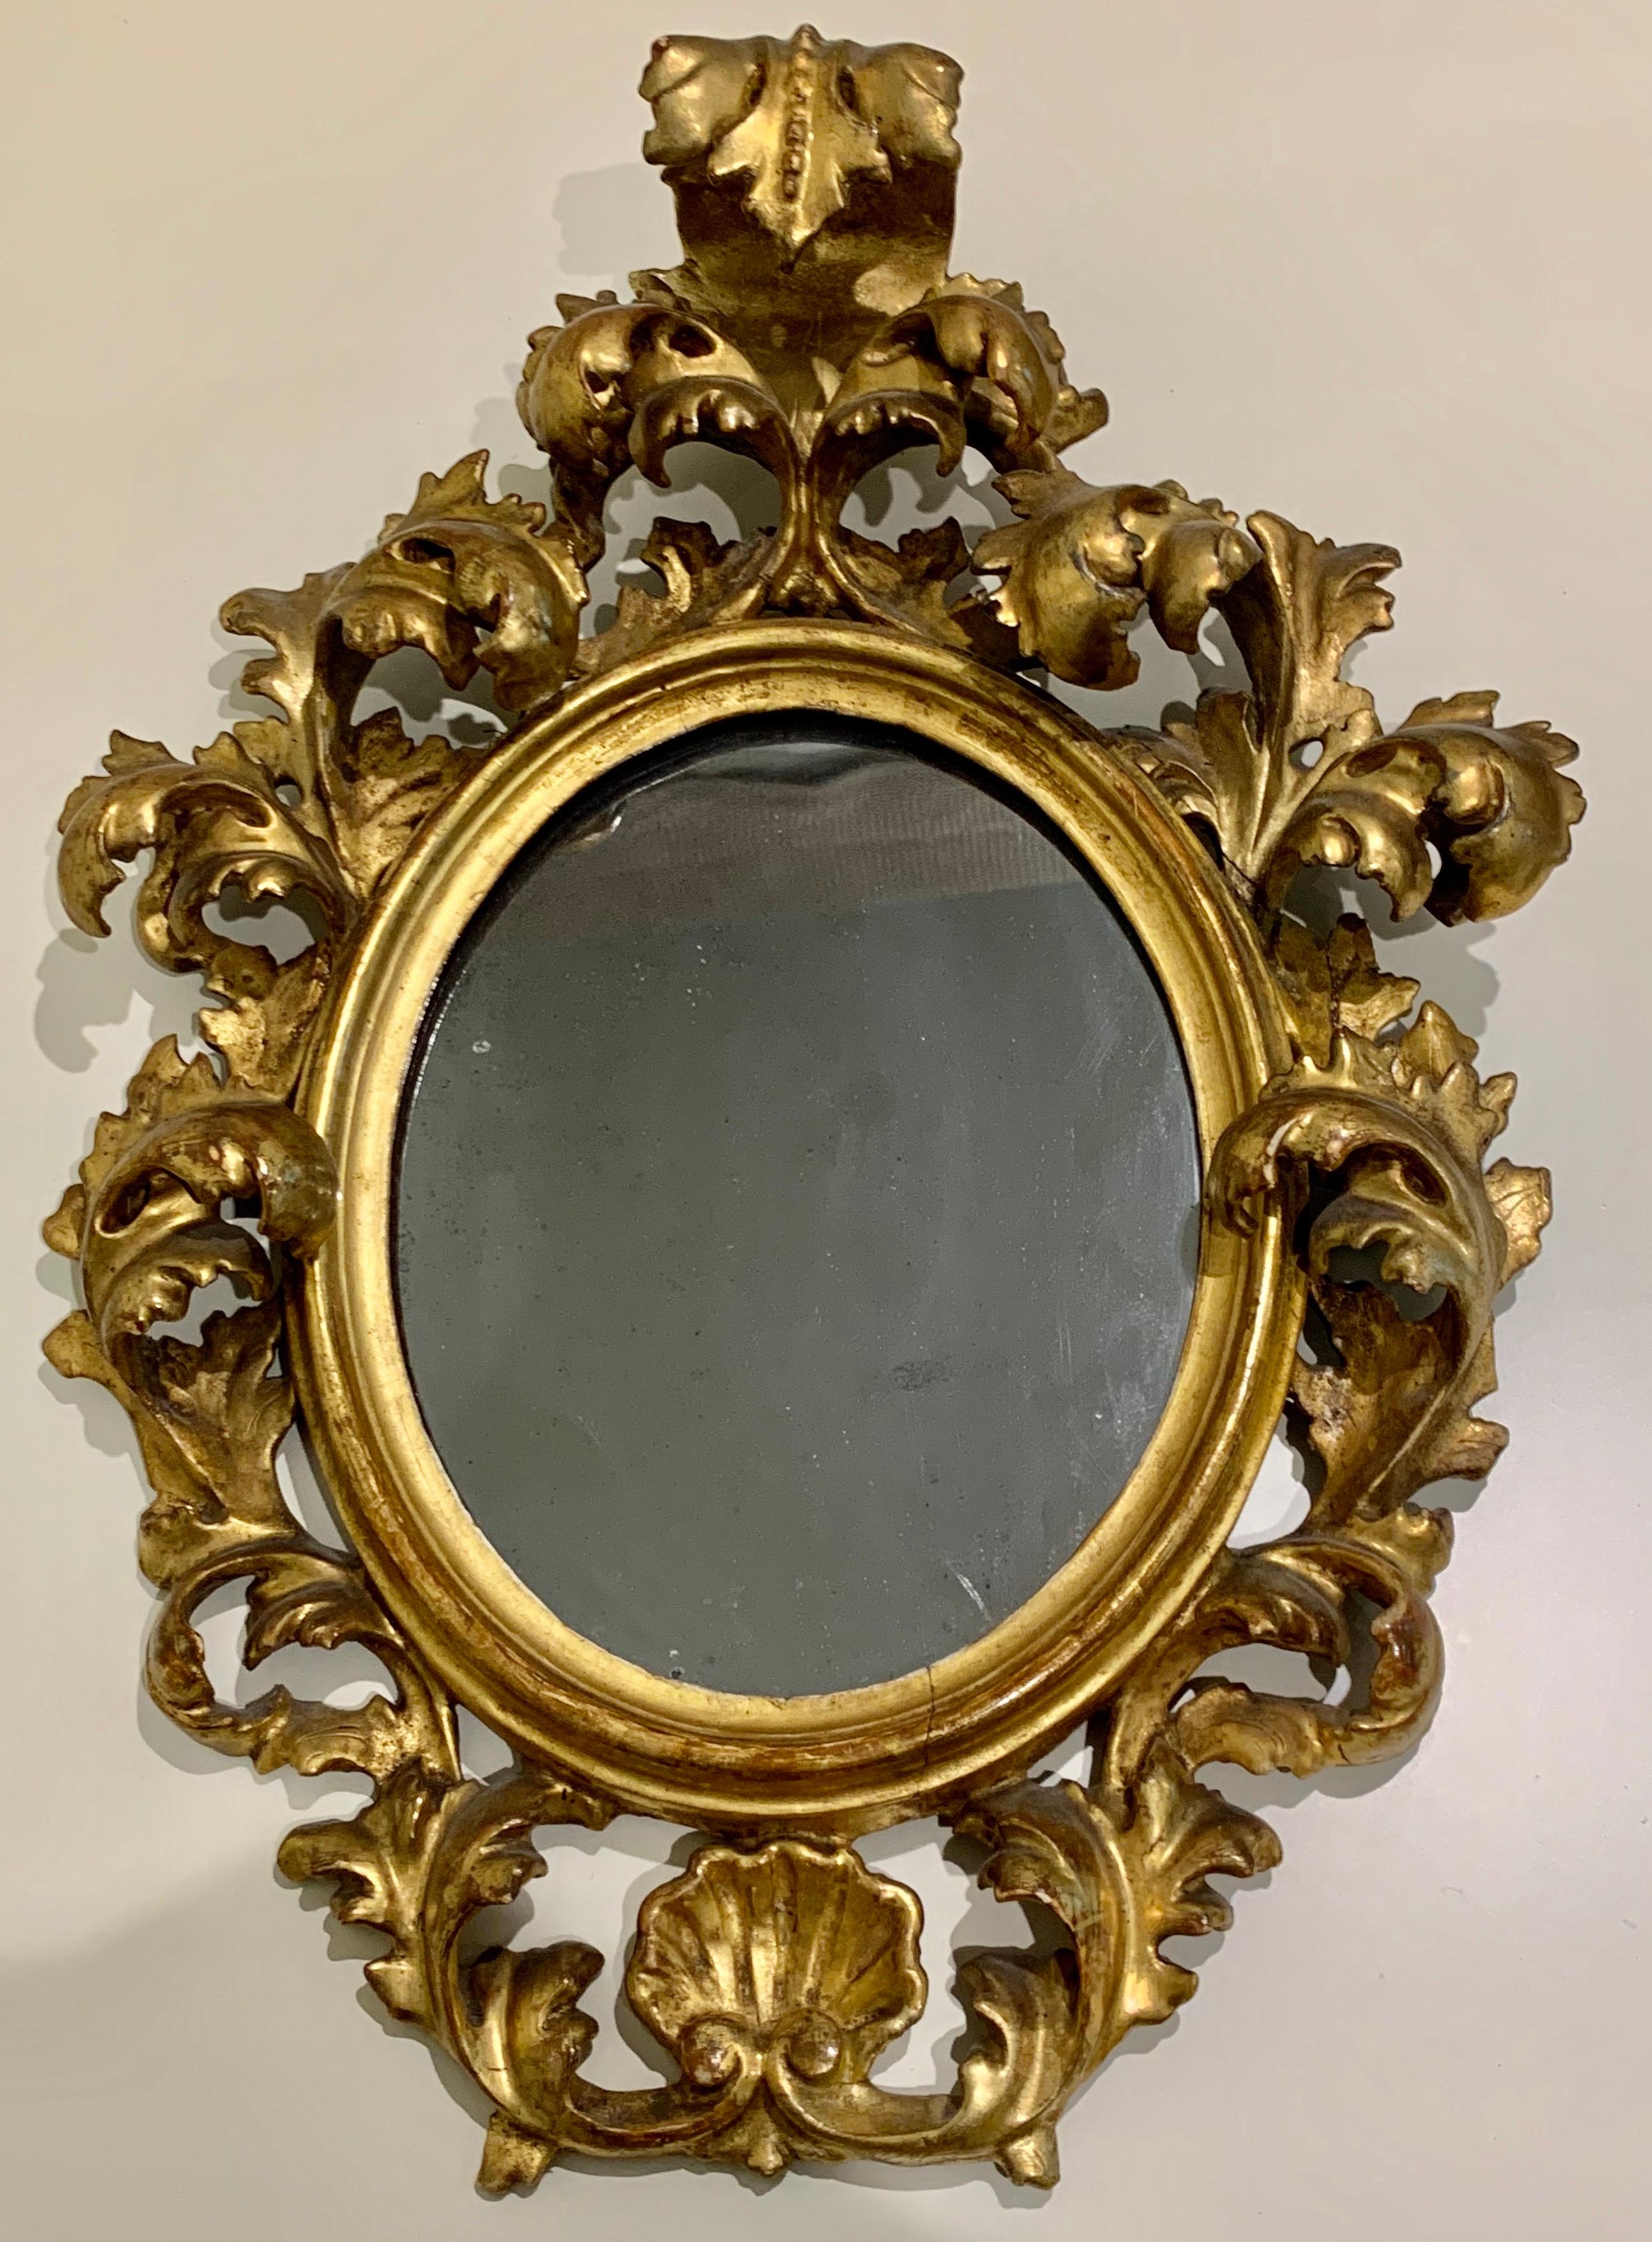 A rare to find matching pair. These Florentine gilt wood oval wall mirrors with a rococo acanthus scroll frame. Each of them feature an intricately carved giltwood frame crafted in the opulent Rococo style, with foliate decoration of acanthus